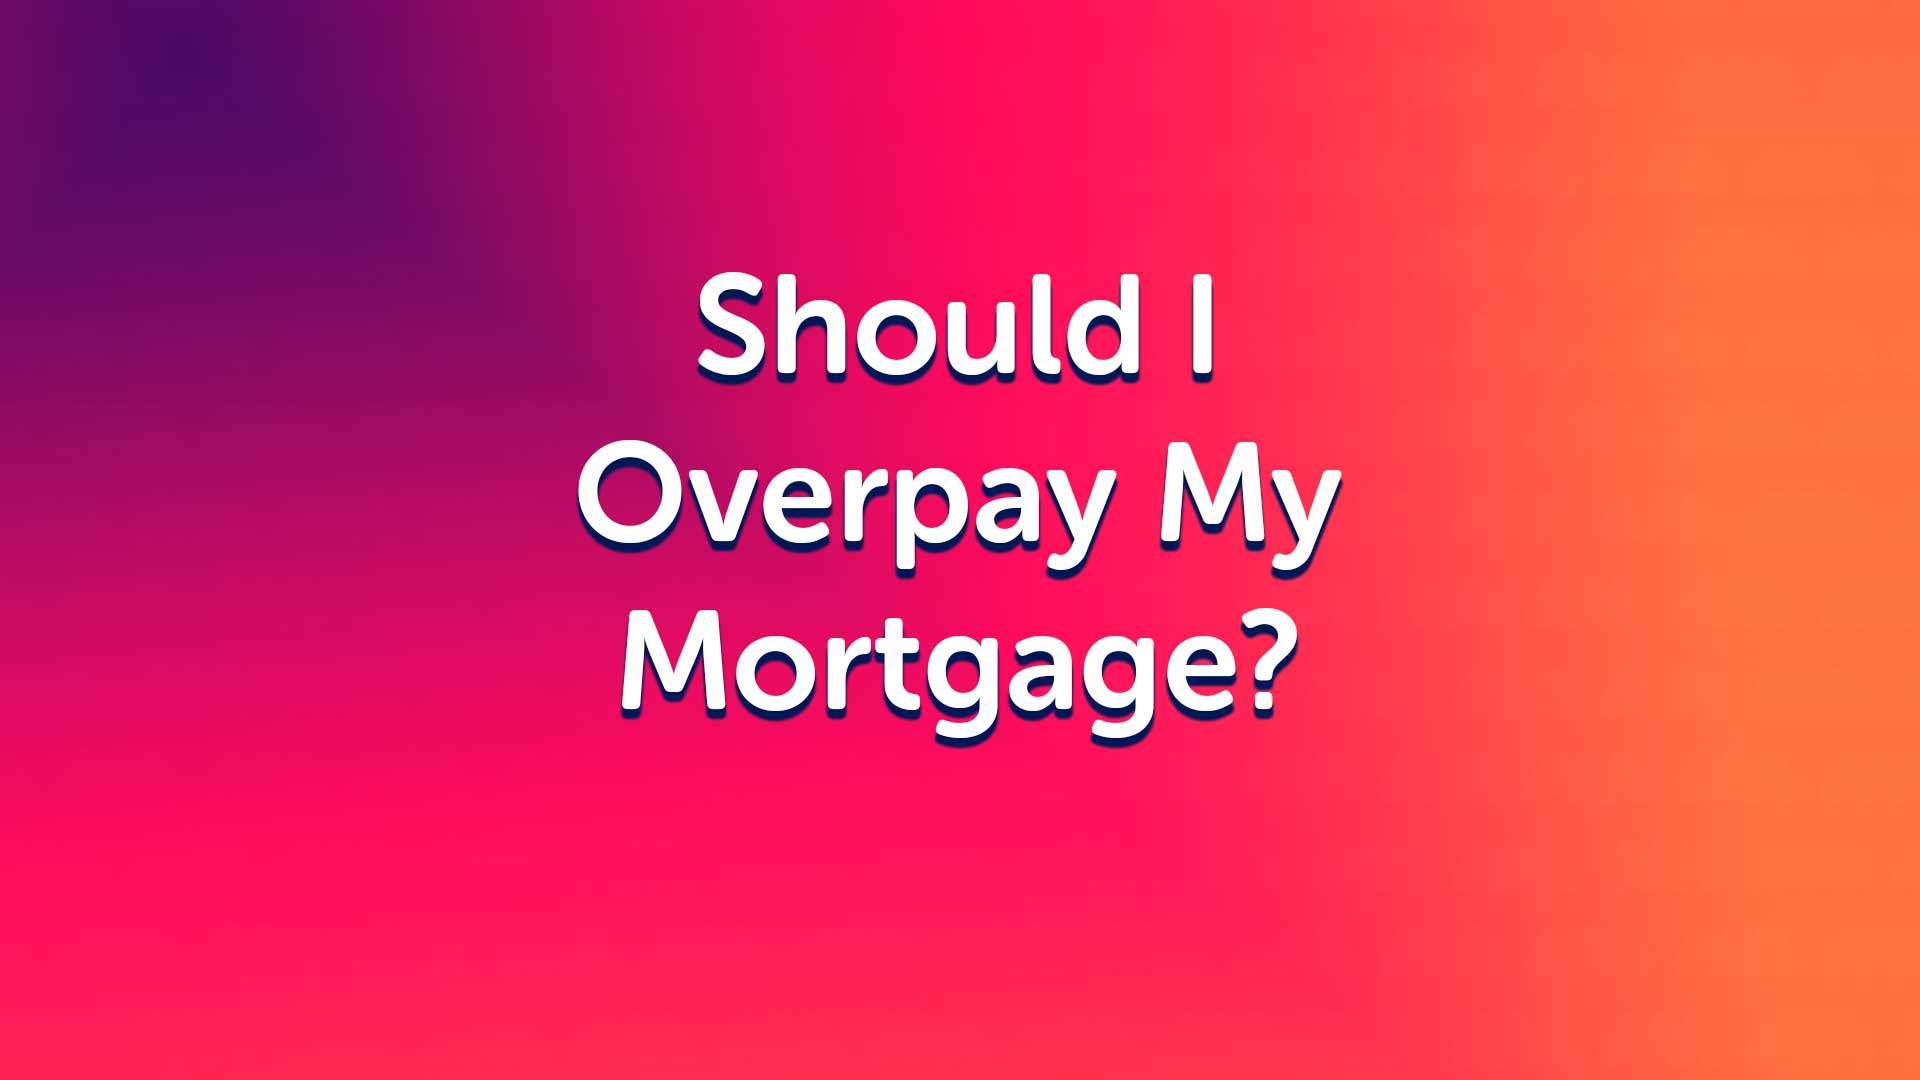 Why Don’t People Overpay Their Mortgages?